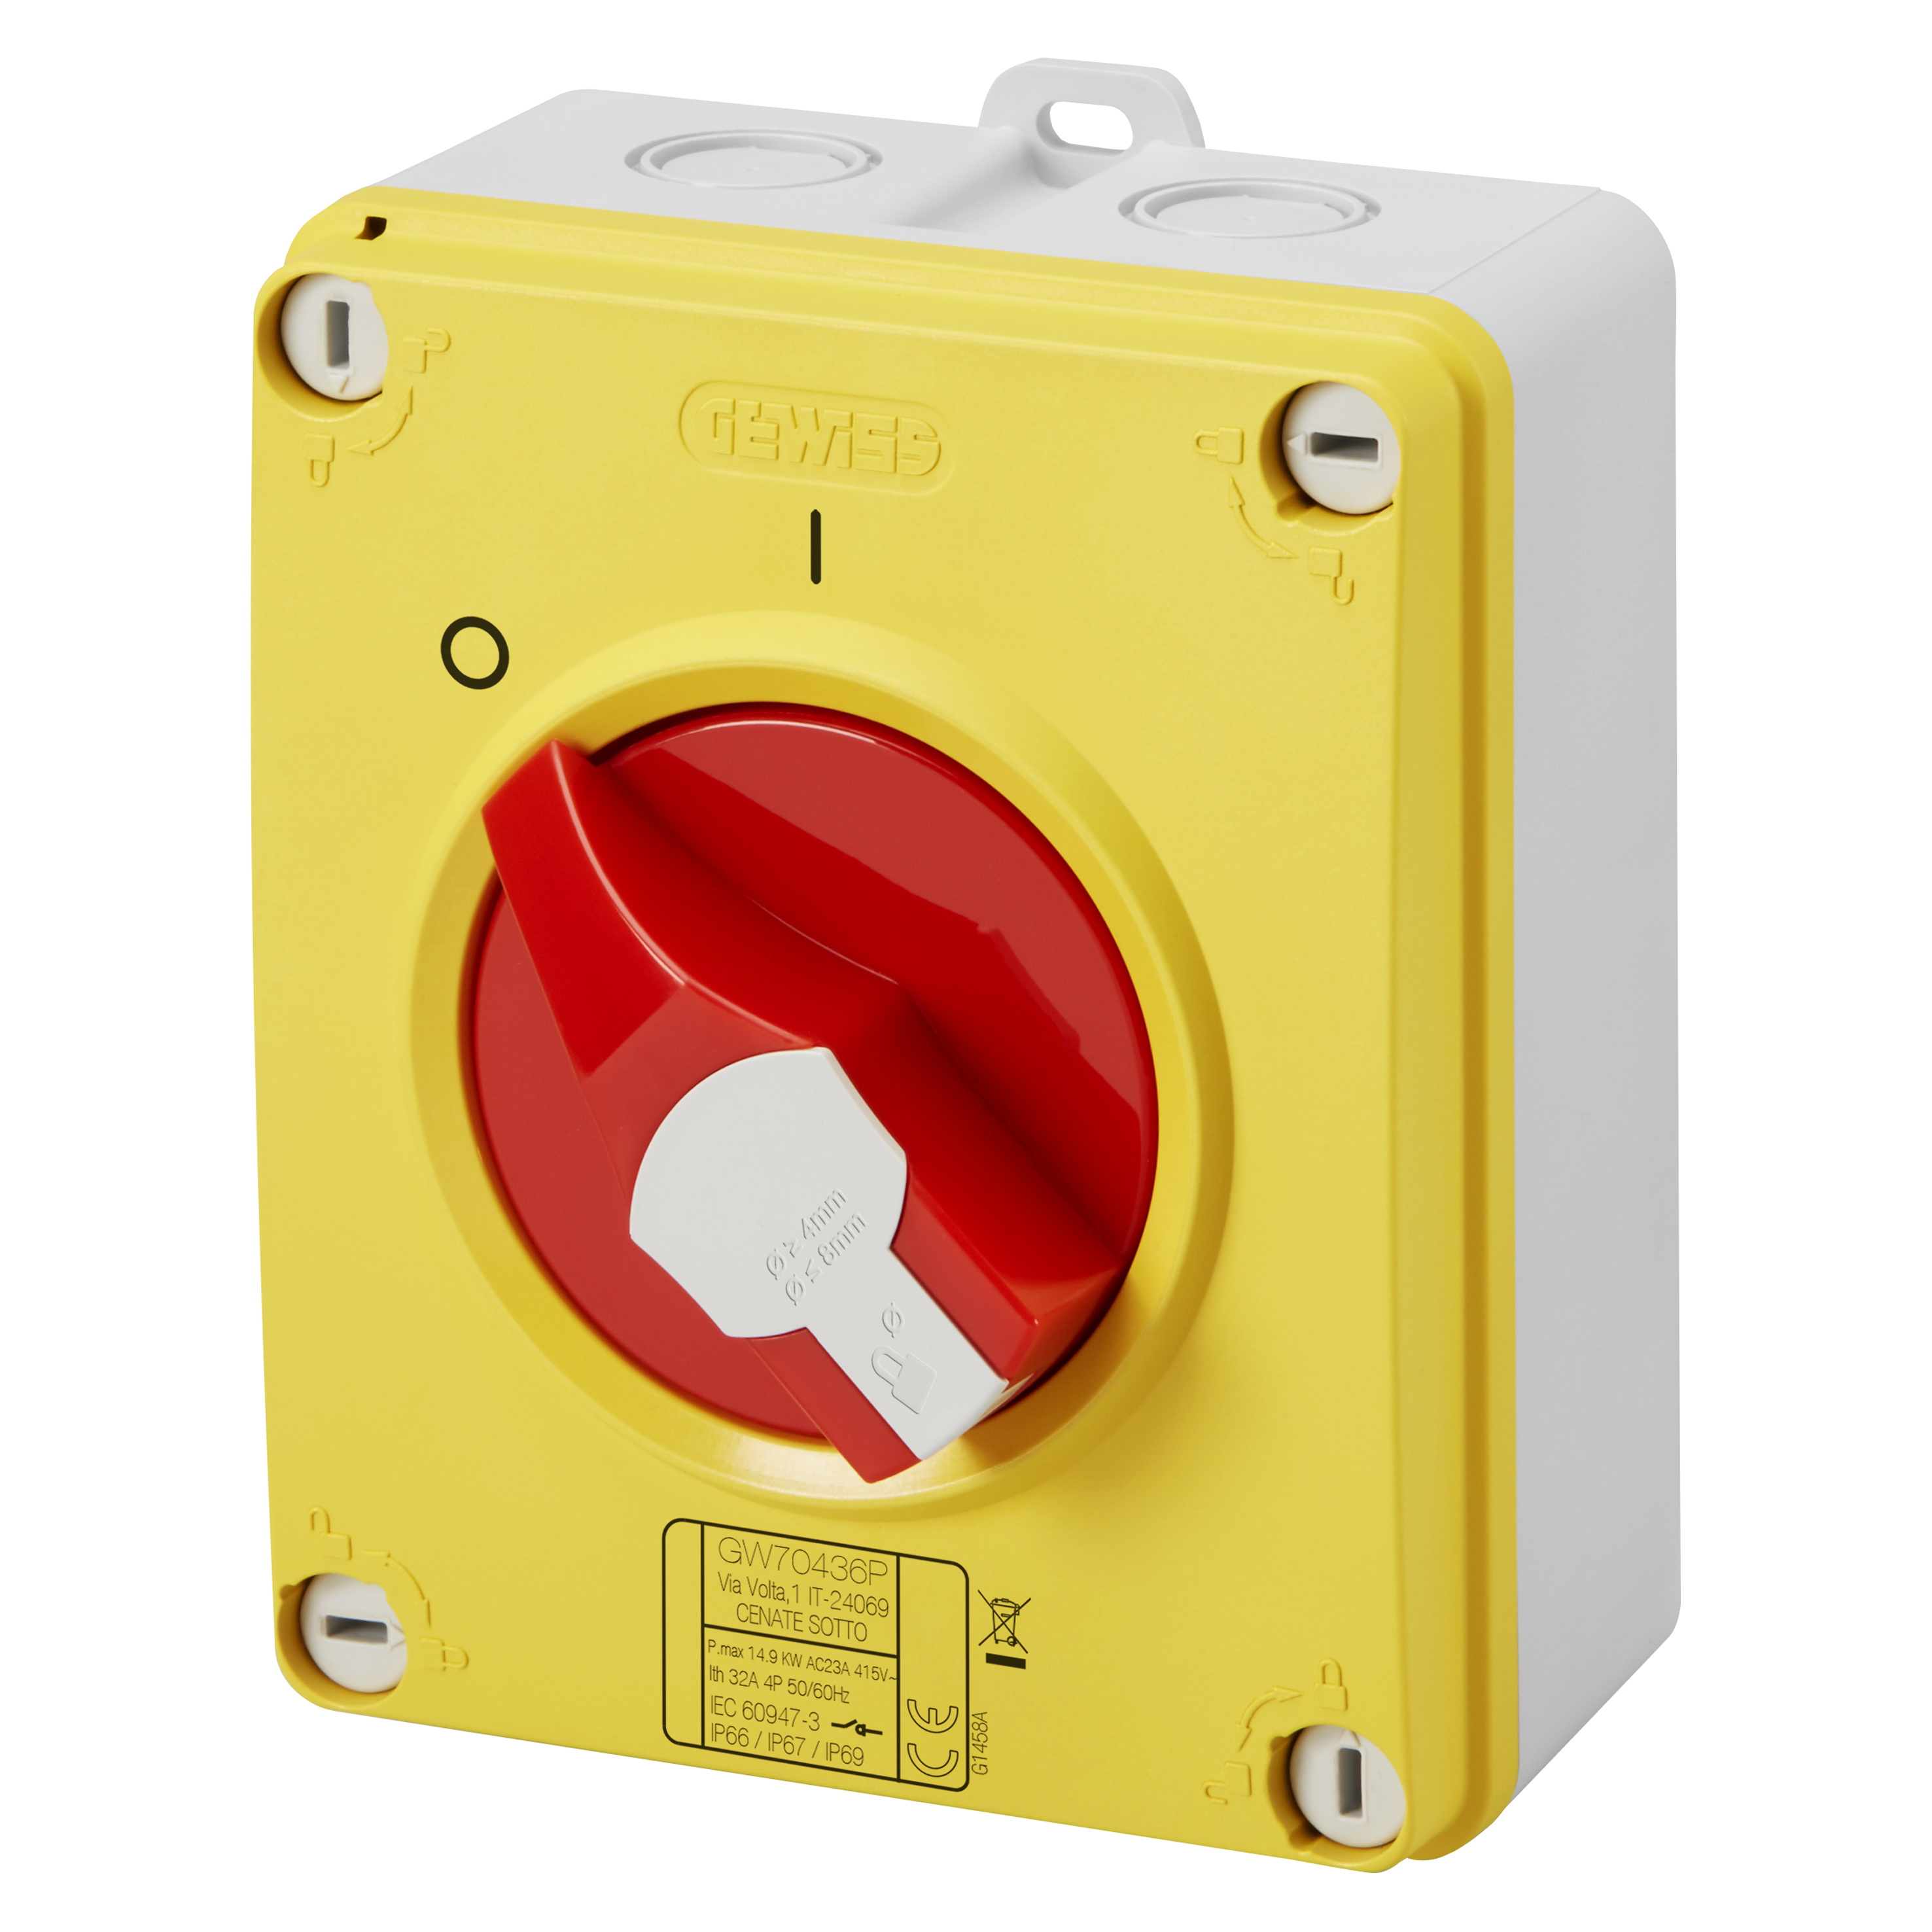 GW70434P Isolator - HP - Emergency - Isolating Material Box - 32A 2P - Lockable Red Knob - IP66/67/69